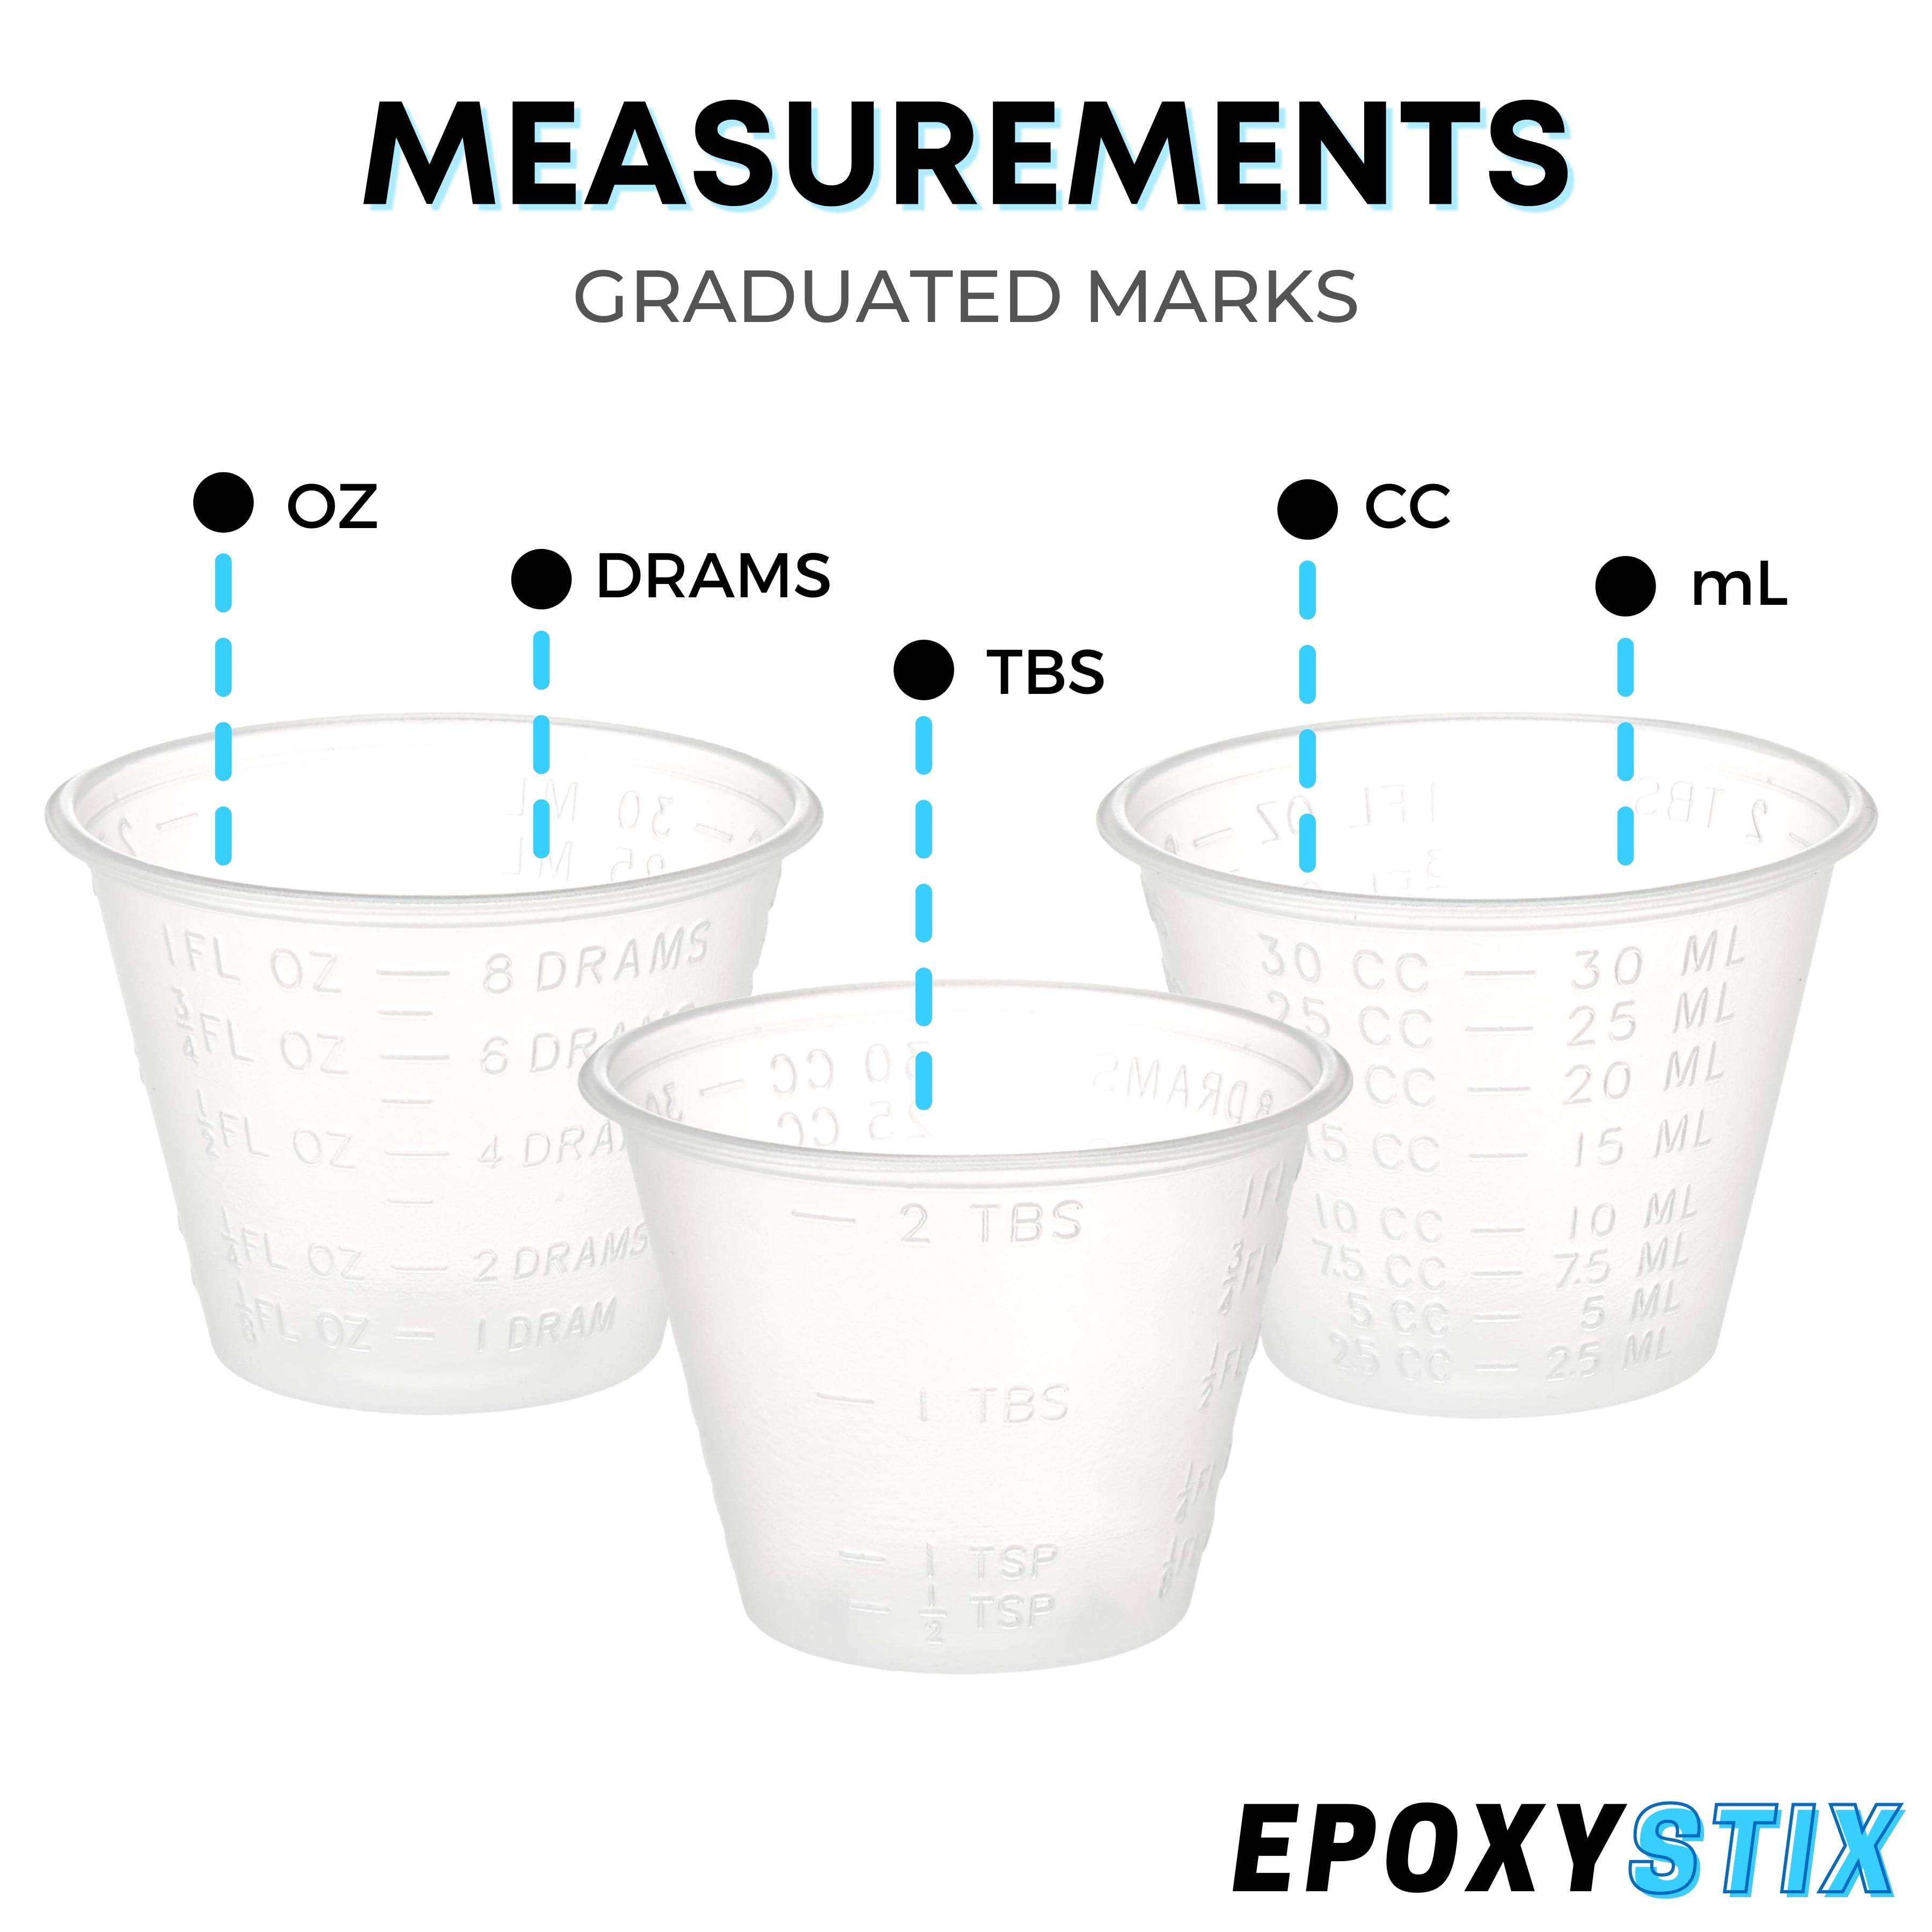 Choosing the right size and material for medicine measuring cups